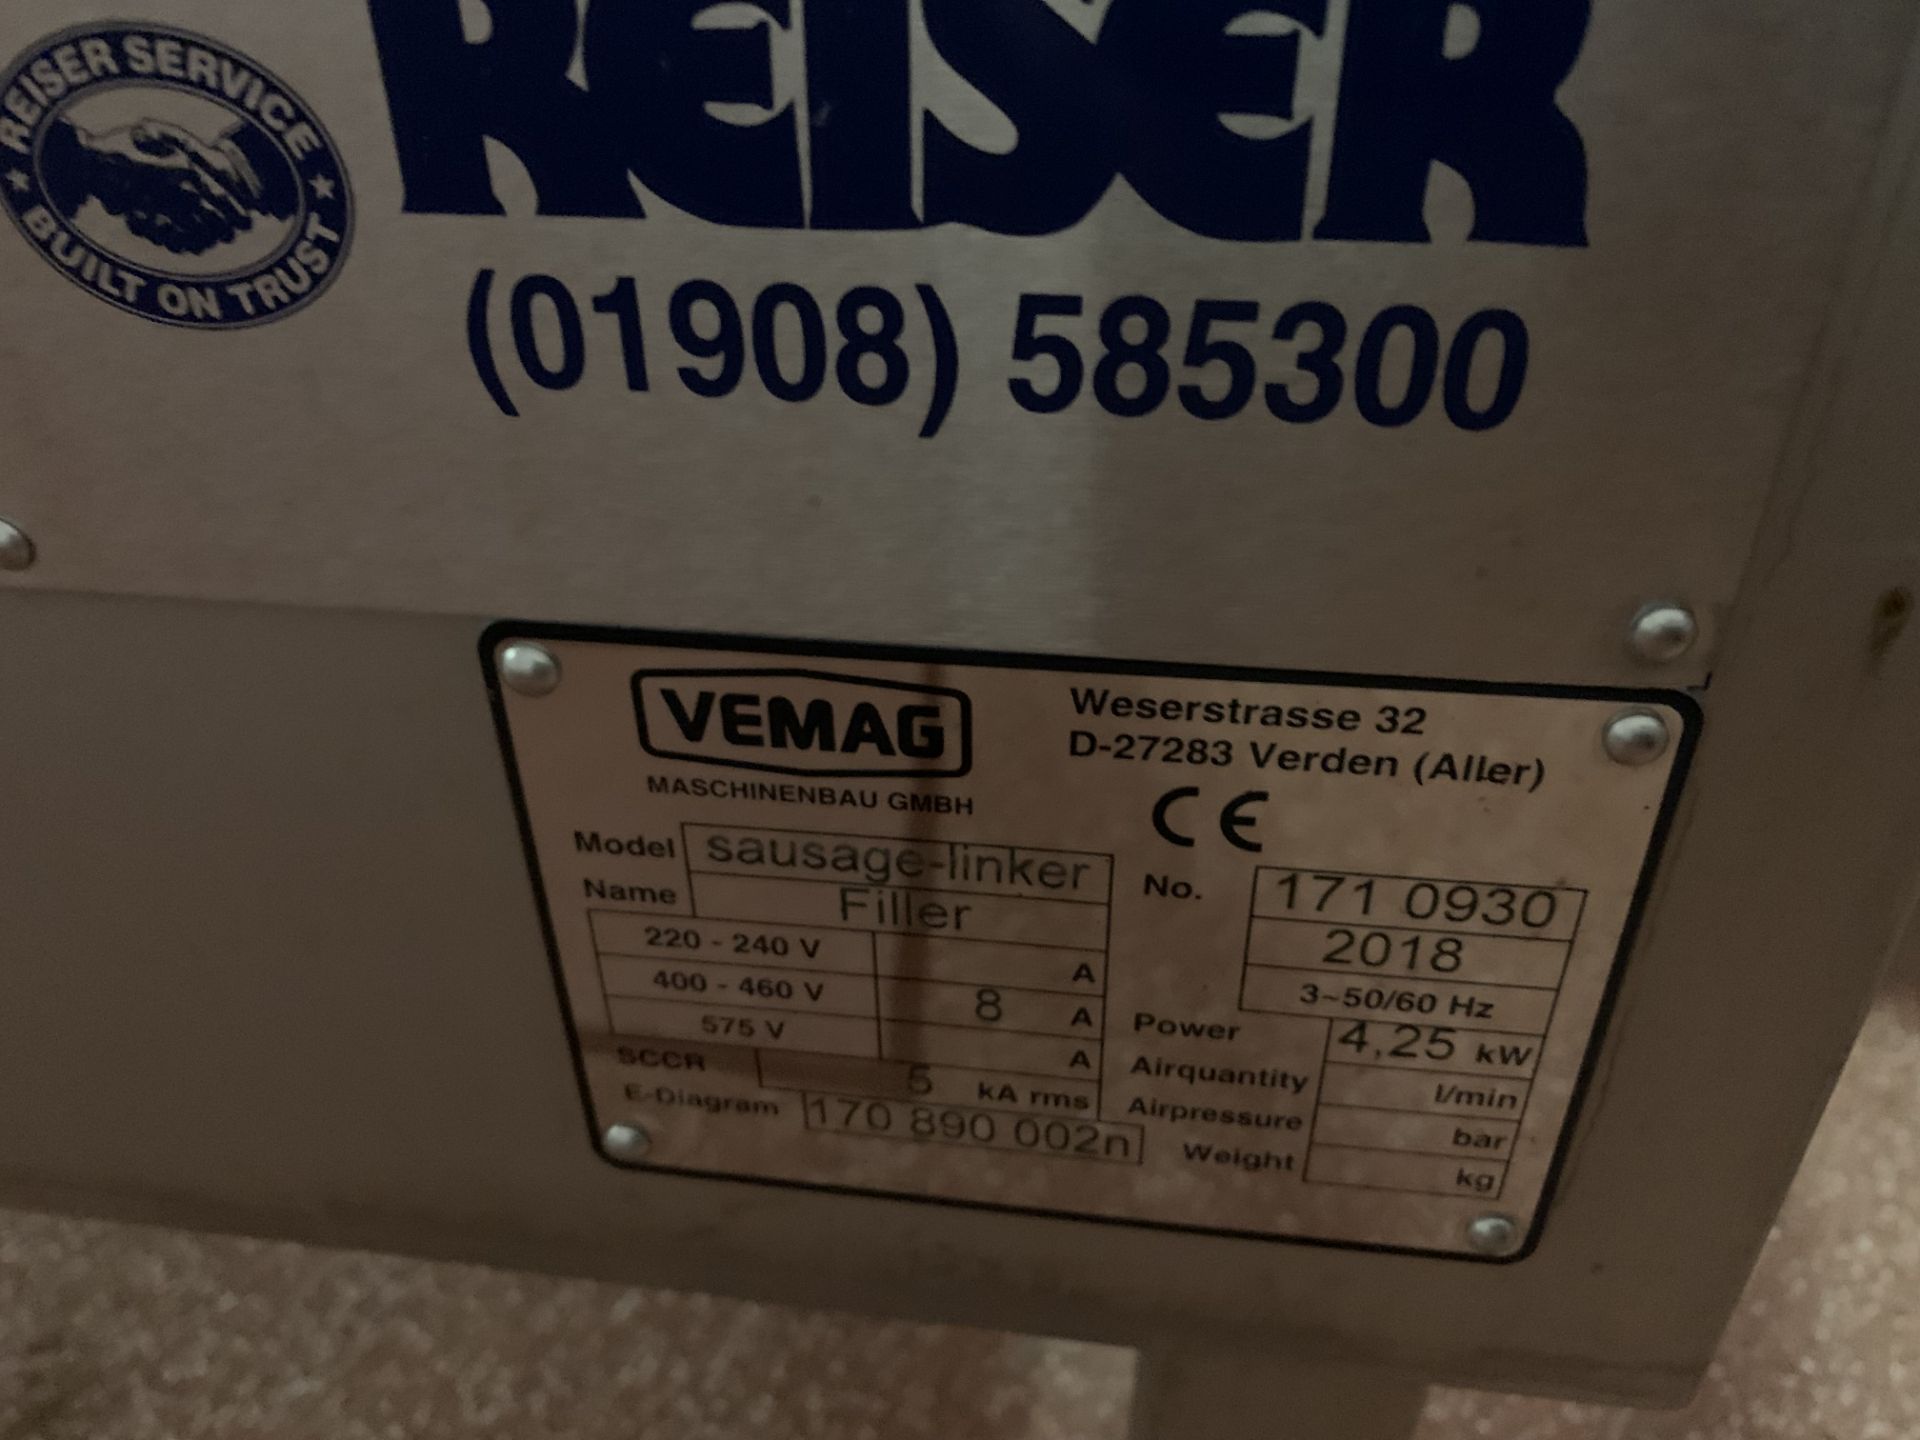 Vemag Lucky Sausage Linker, Serial Number: 171-0930 (2018) - Image 4 of 5